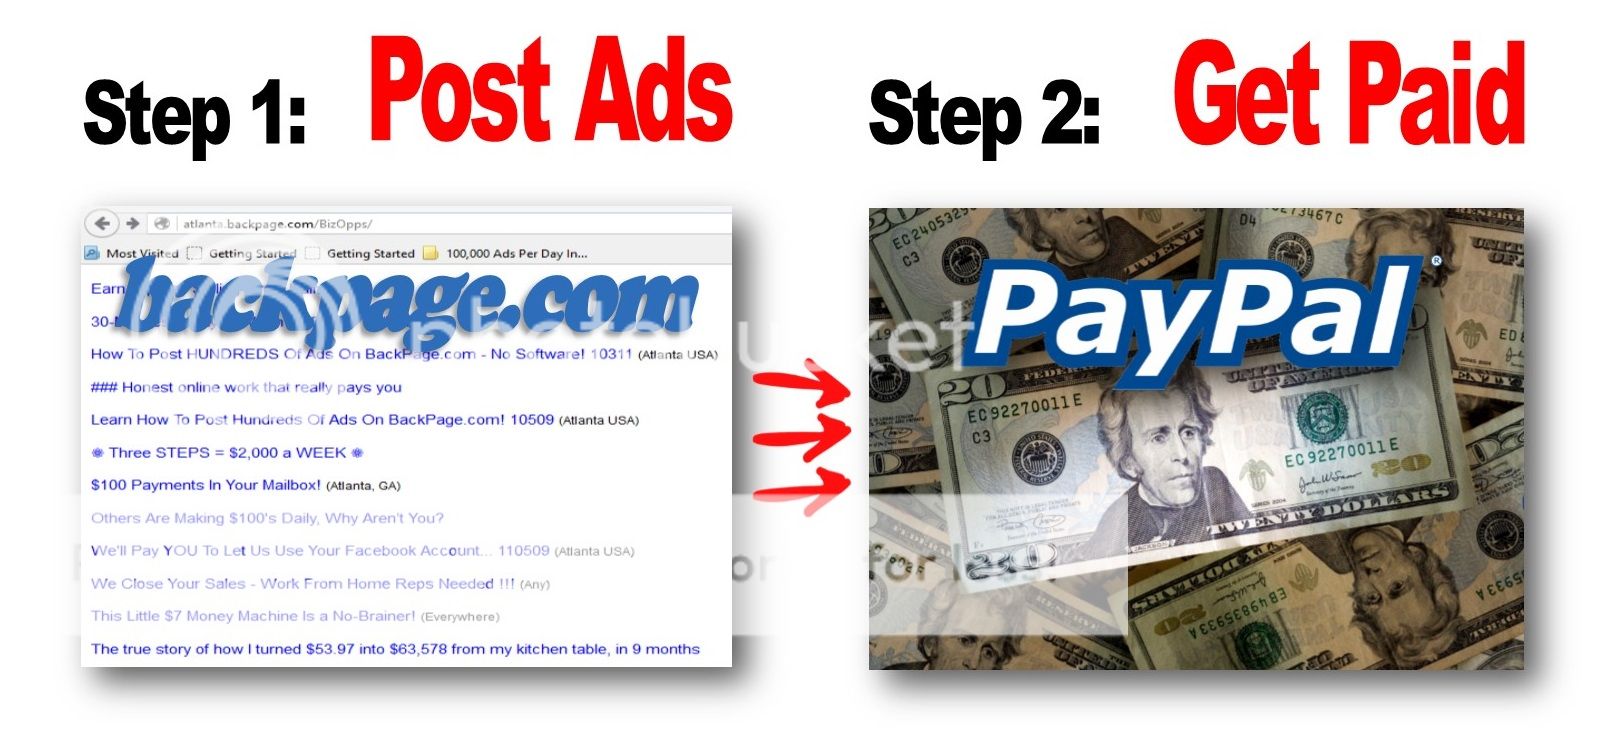 Post Ads - Get Paid